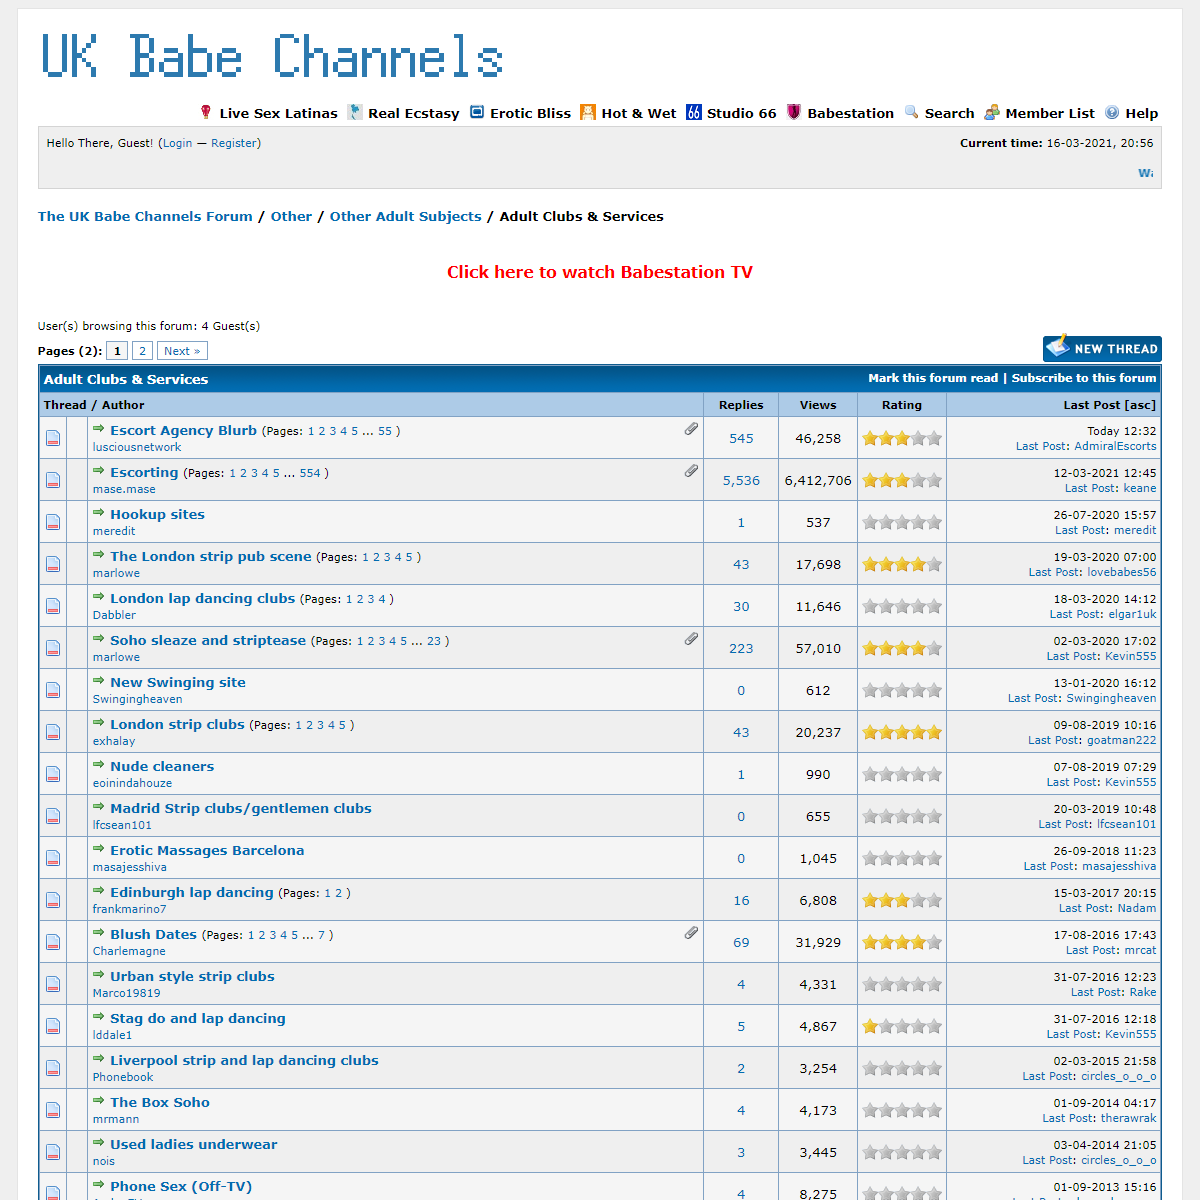 The UK Babe Channels Forum - Adult Clubs & Services